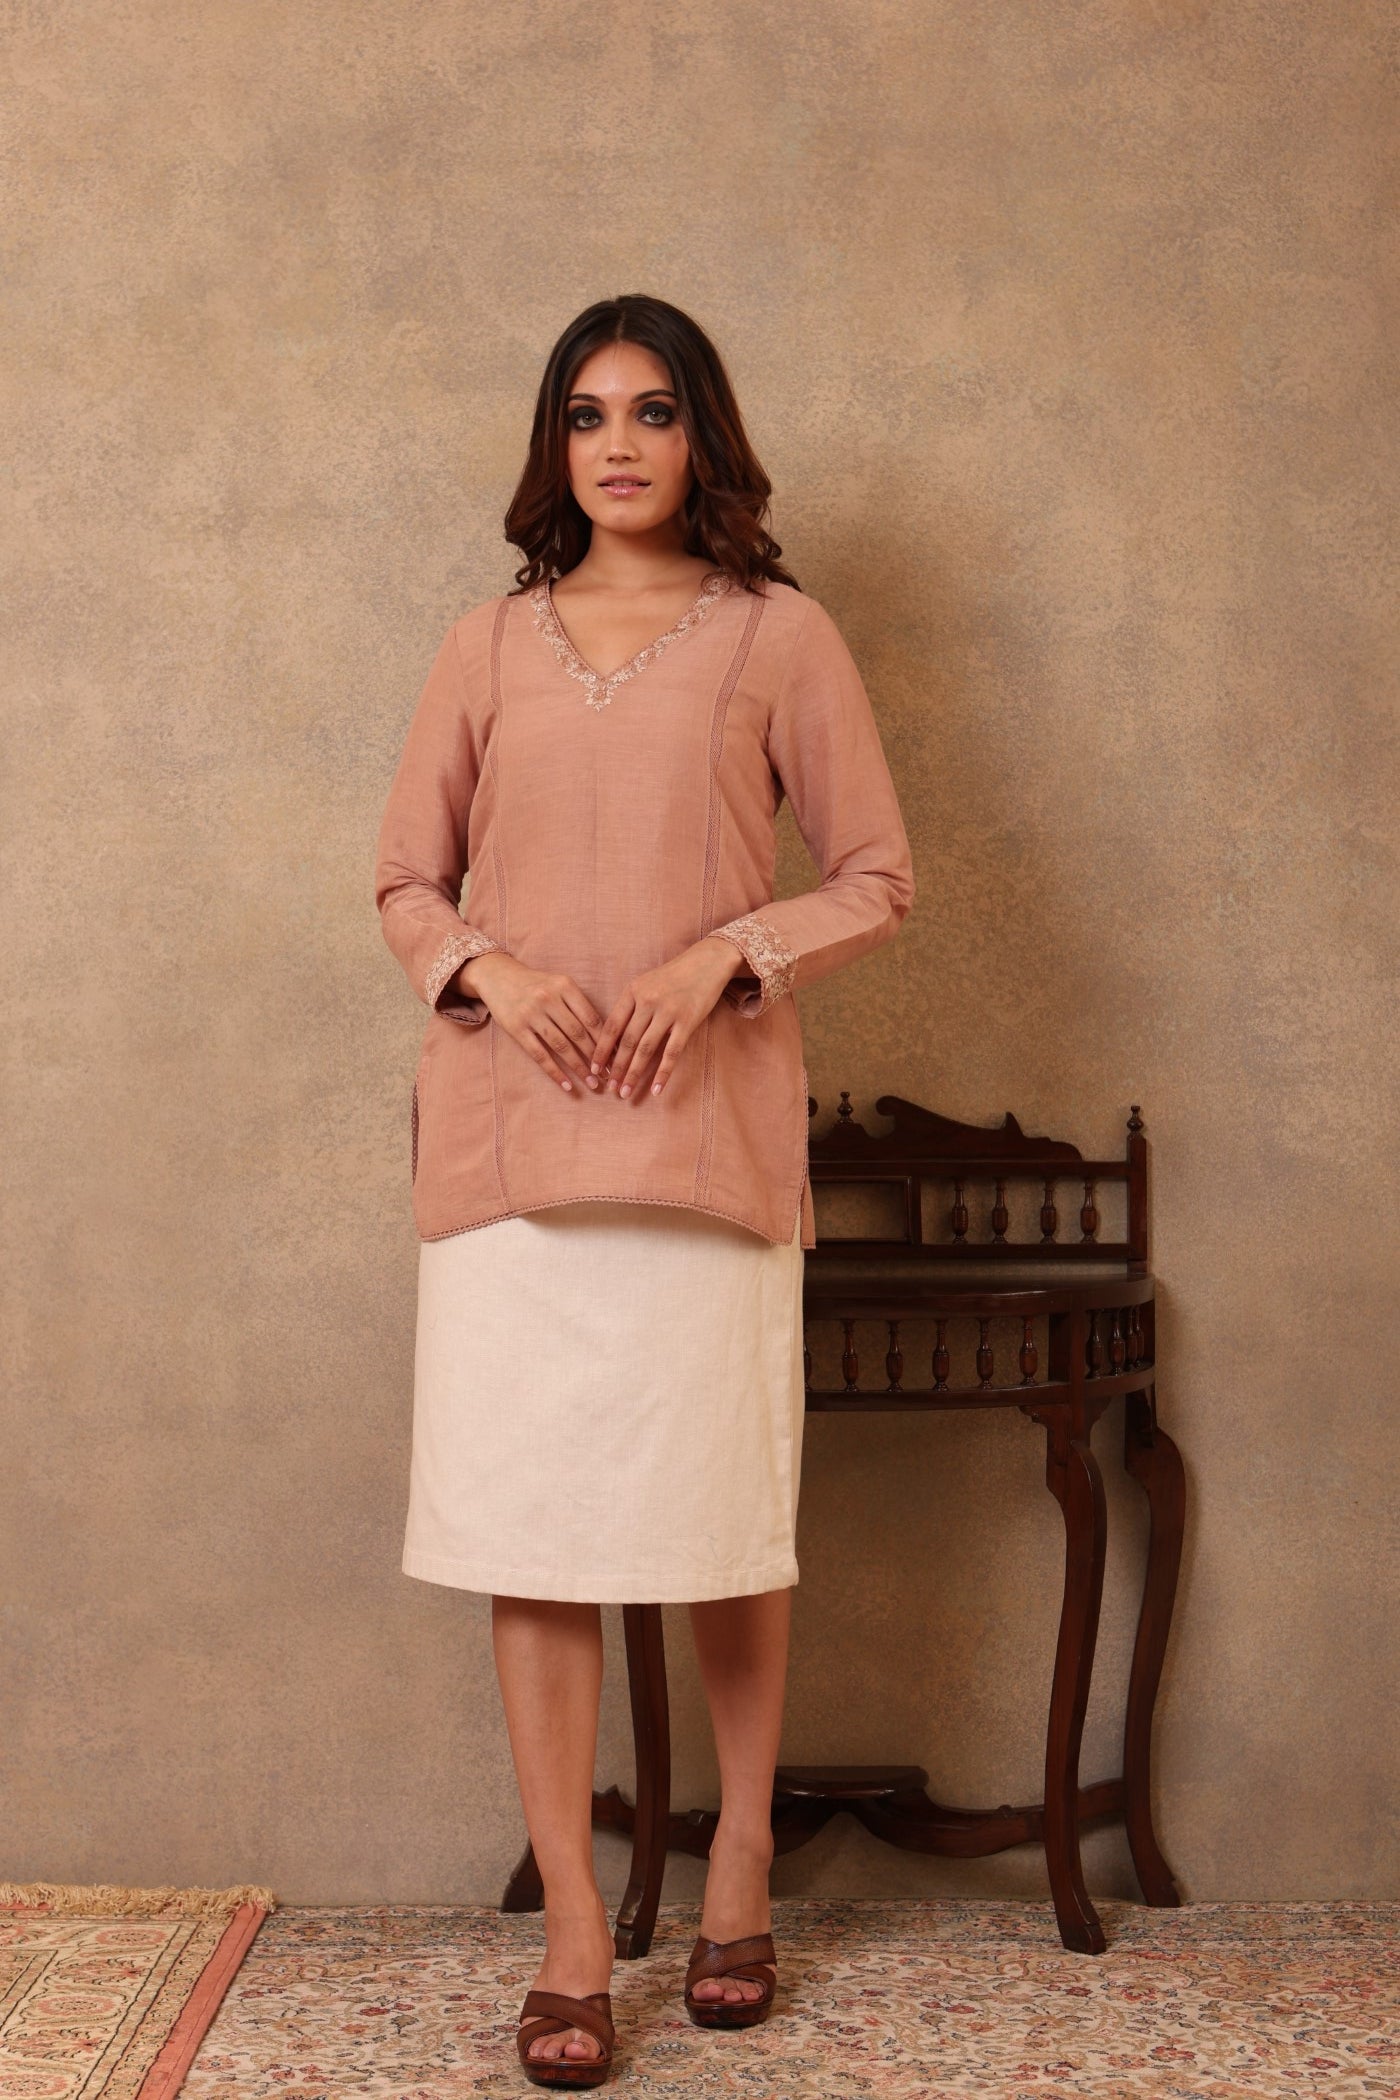 Evening-Sand Hand-Embroidered Handloom Pure Linen-Cotton Short Blouse With Cotton Laces